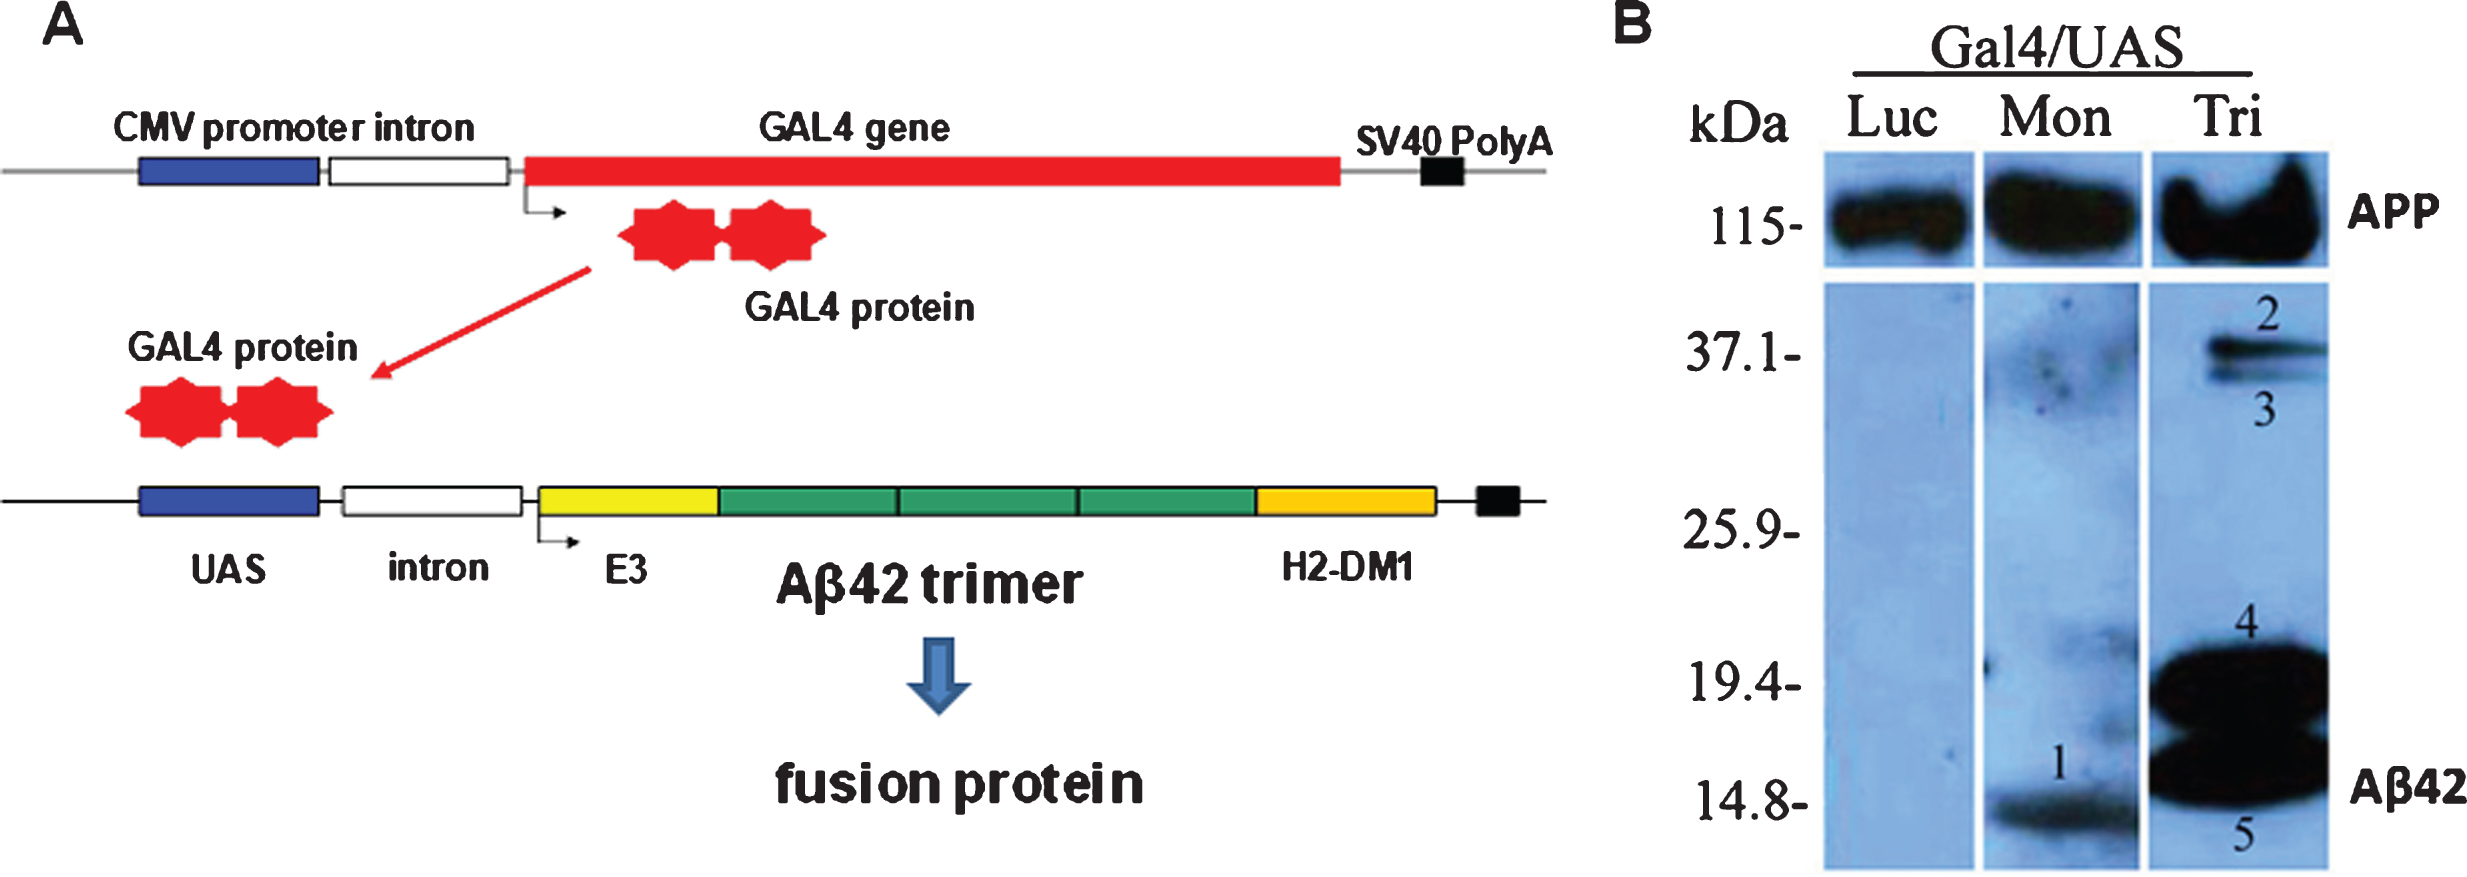 Schematic representation of the plasmid system (Gal4 activator, UAS/DNA Aβ42 trimer responder) and analysis of Aβ42 expression in mouse ear after gene gun transfection with Aβ42 monomer and Aβ42 trimer. A) Gal4 protein encoded by the activator plasmid binds as a homodimer to UAS sites present upstream of the promoter on the responder plasmid. Gal4 binding drives transcription of the Aβ42 trimer sequence, a peptide leader sequence, and an endosomal targeting sequence. B) Protein lysates from mouse ear were separated on 4–20% SDS PAGE and probed with an anti-human Aβ42 antibody. UAS-monomer transfection (Mon) in mouse ear resulted in a unique band (1), UAS-timer (Tri) transfection resulted in doublets at 19 kDa (2 + 3), and further dimerized bands 40 kDa (4 + 5), respectively. Control DNA (Gal4/UAS-Luc) mouse ear lysates showed no protein bands detectable with the Aβ42 antibody (Luc). (Modified and with permission from Vaccine, Qu et al., 2010 [14]).